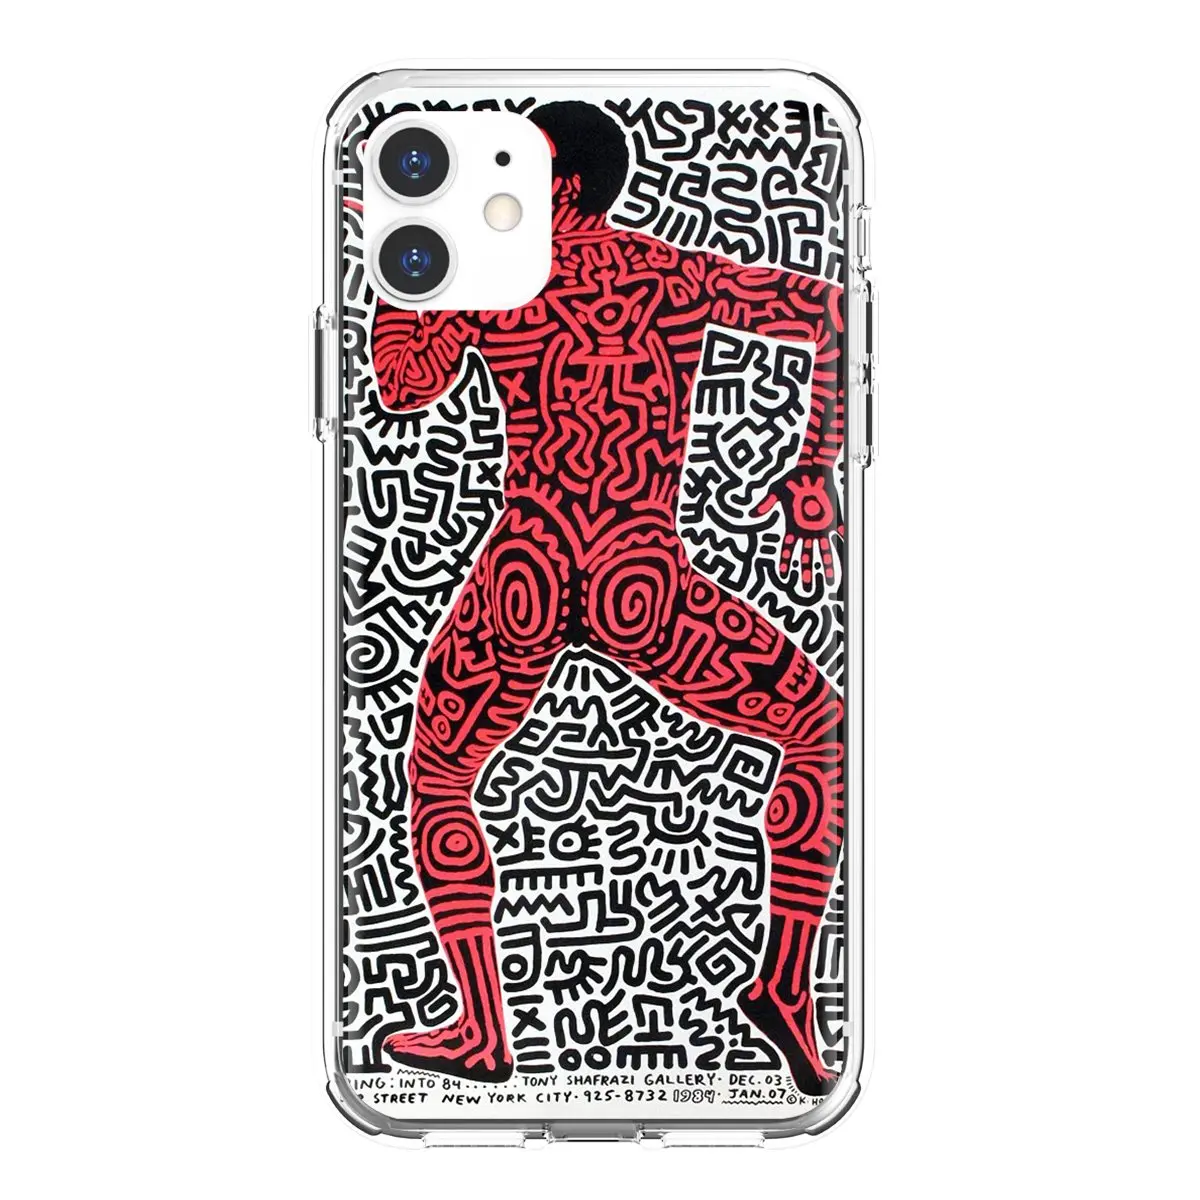 For iPod Touch 5 6 Xiaomi Redmi S2 6 Pro 5A Pocophone F1 LG G6 Q6 Q7 G5 Hot-Keith-Haring Mobile Phone Cover images - 6